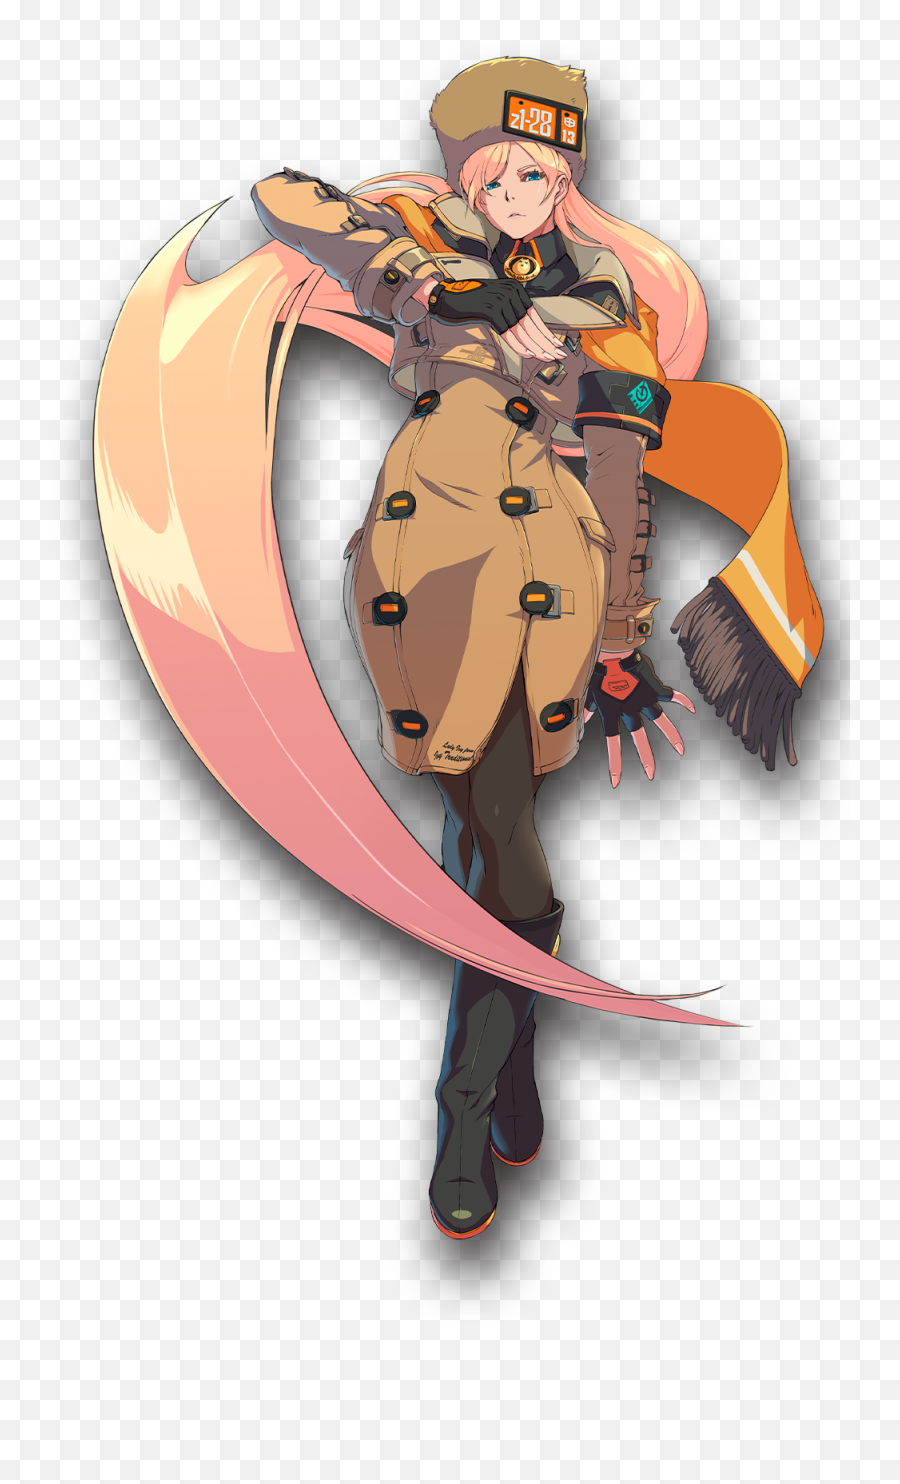 Millia Character Guilty Gear - Strive Arc System Works Guilty Gear Strive Millia Emoji,Guilty Gear Logo